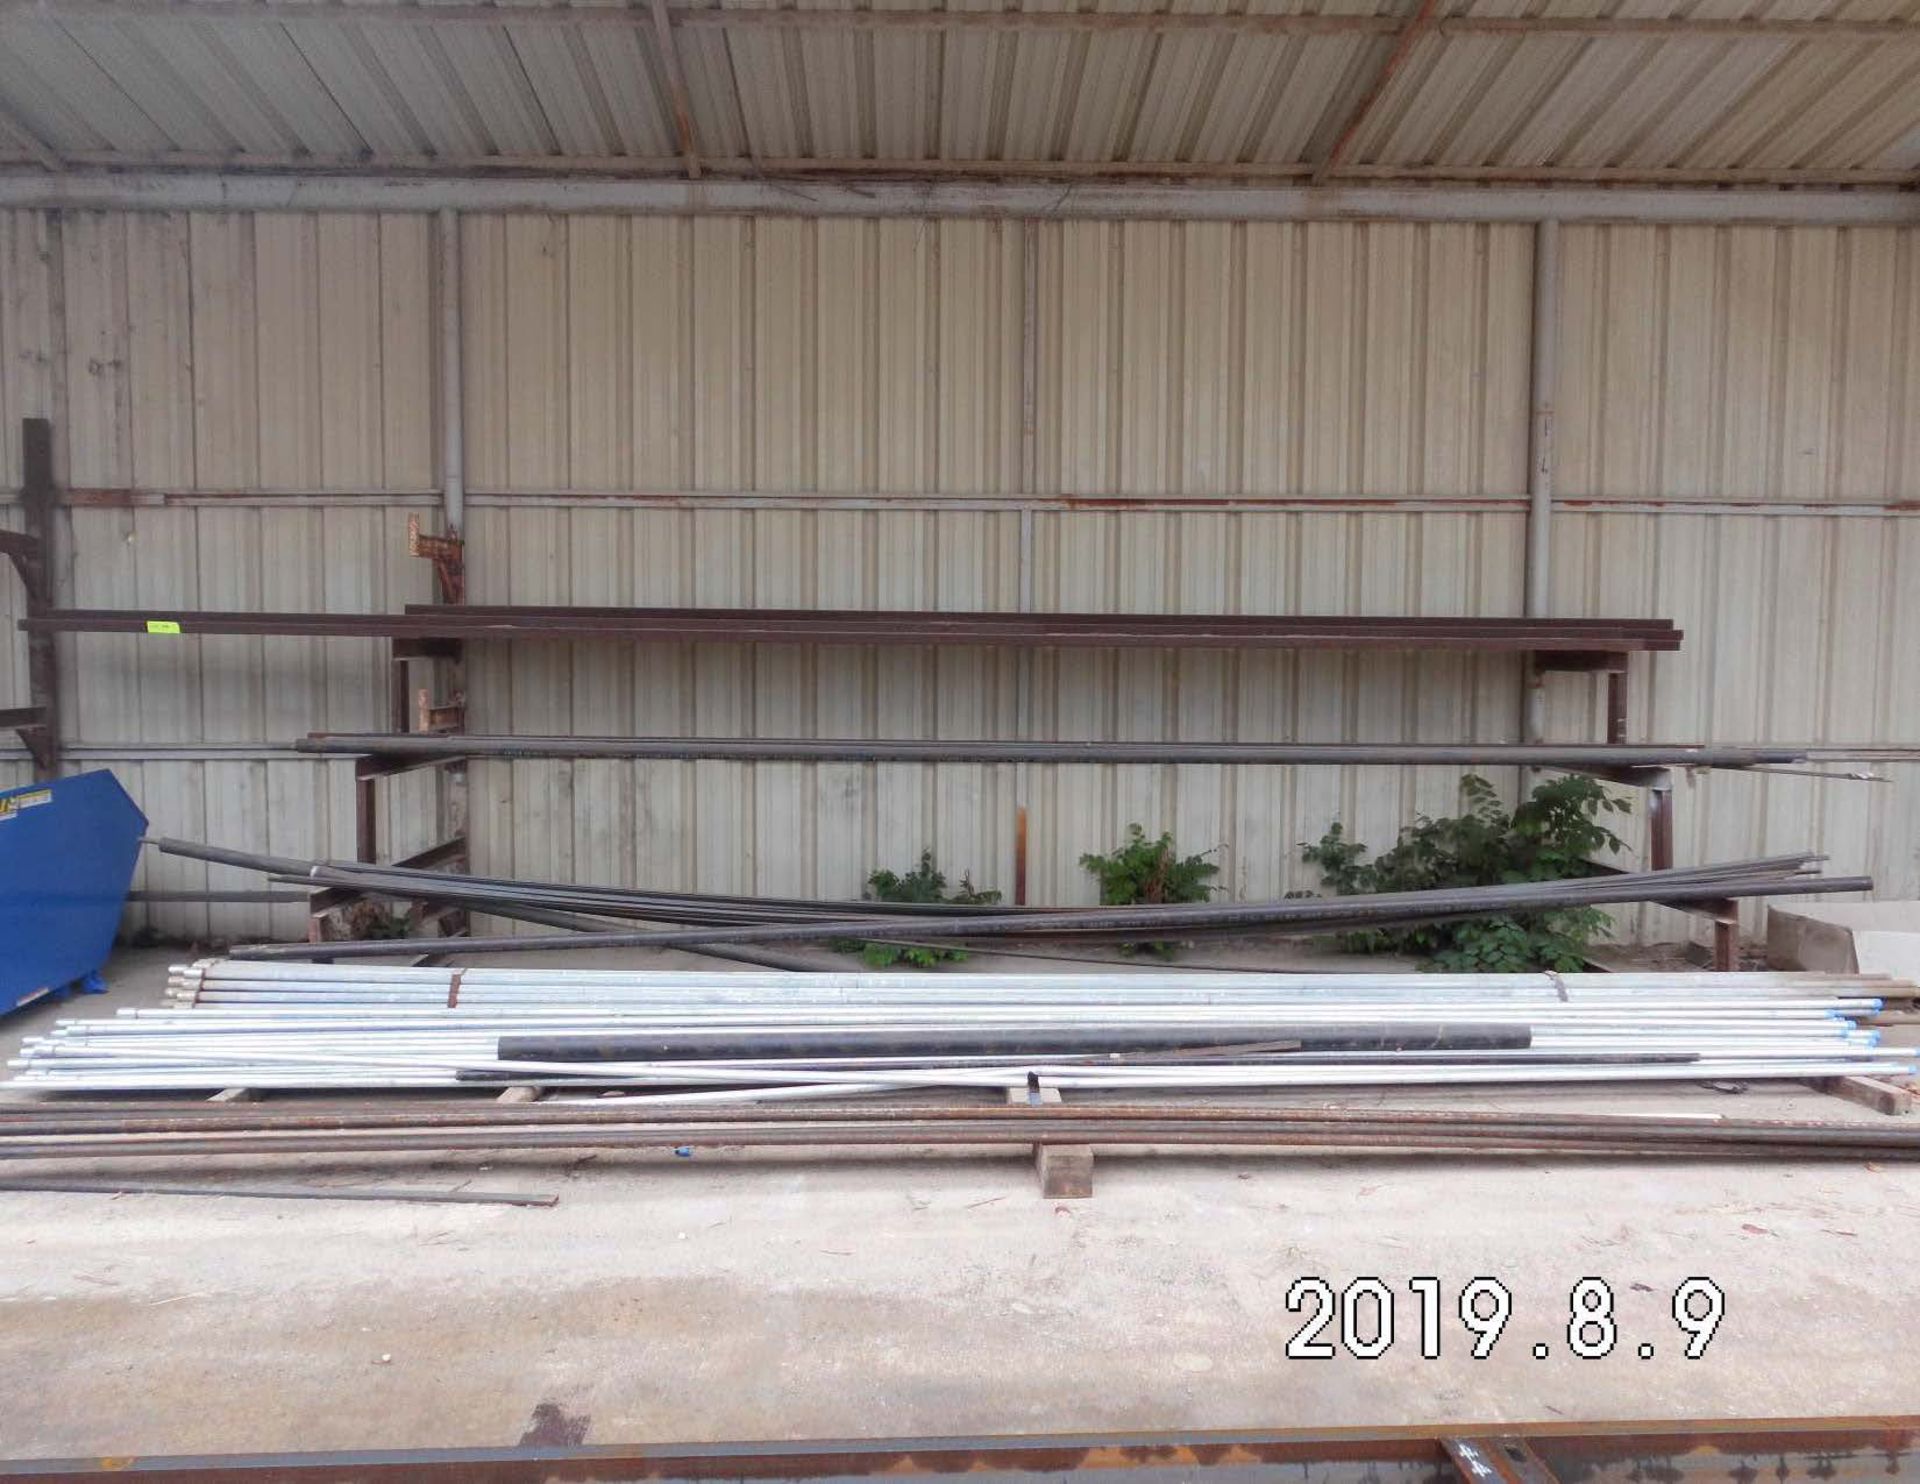 LOT CONSISTING OF: (APPROX. 360 LINEAR INCHES) TUBE RECTANGULAR,4" X 2" X 14 GA,A500-B (LOADING